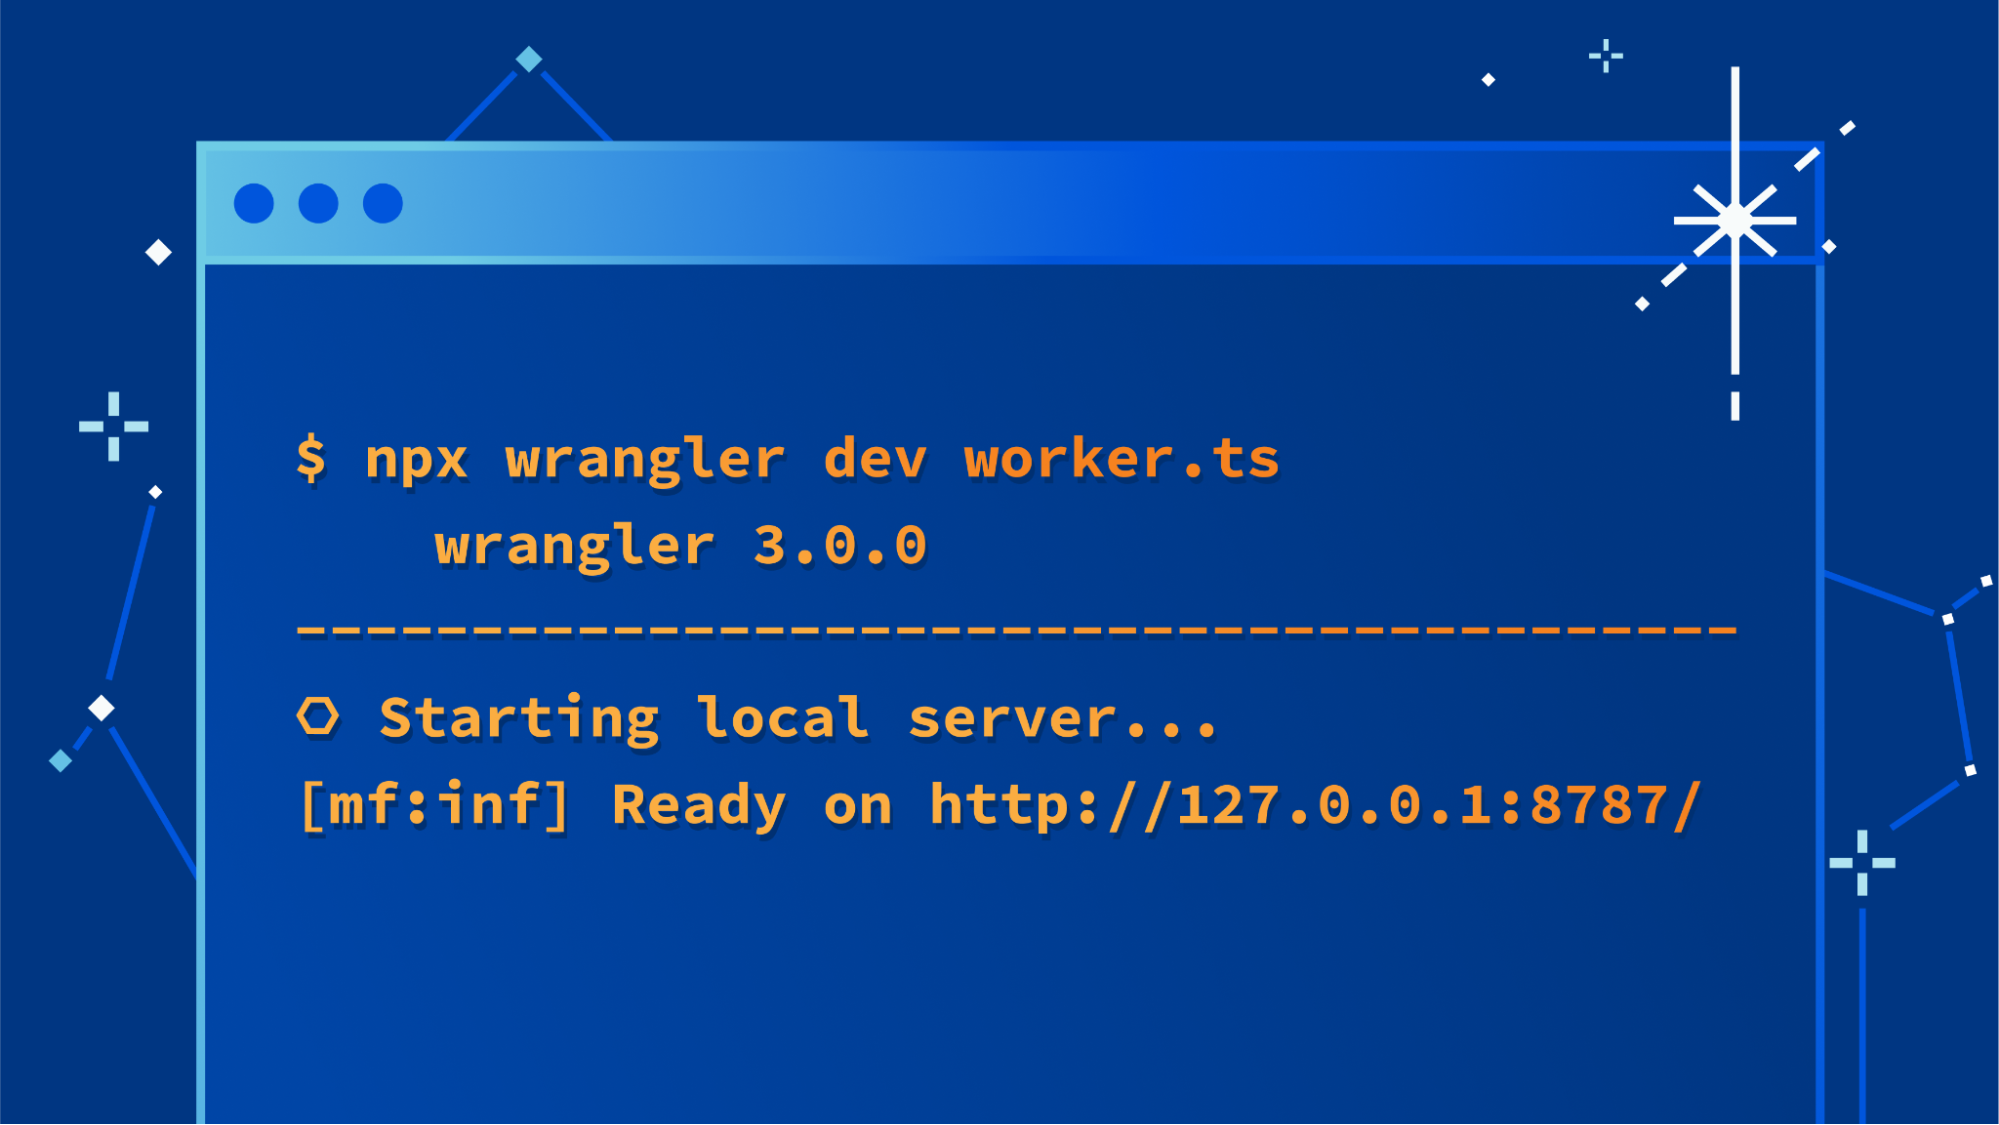 Improved local development with wrangler and workerd, Developer Week